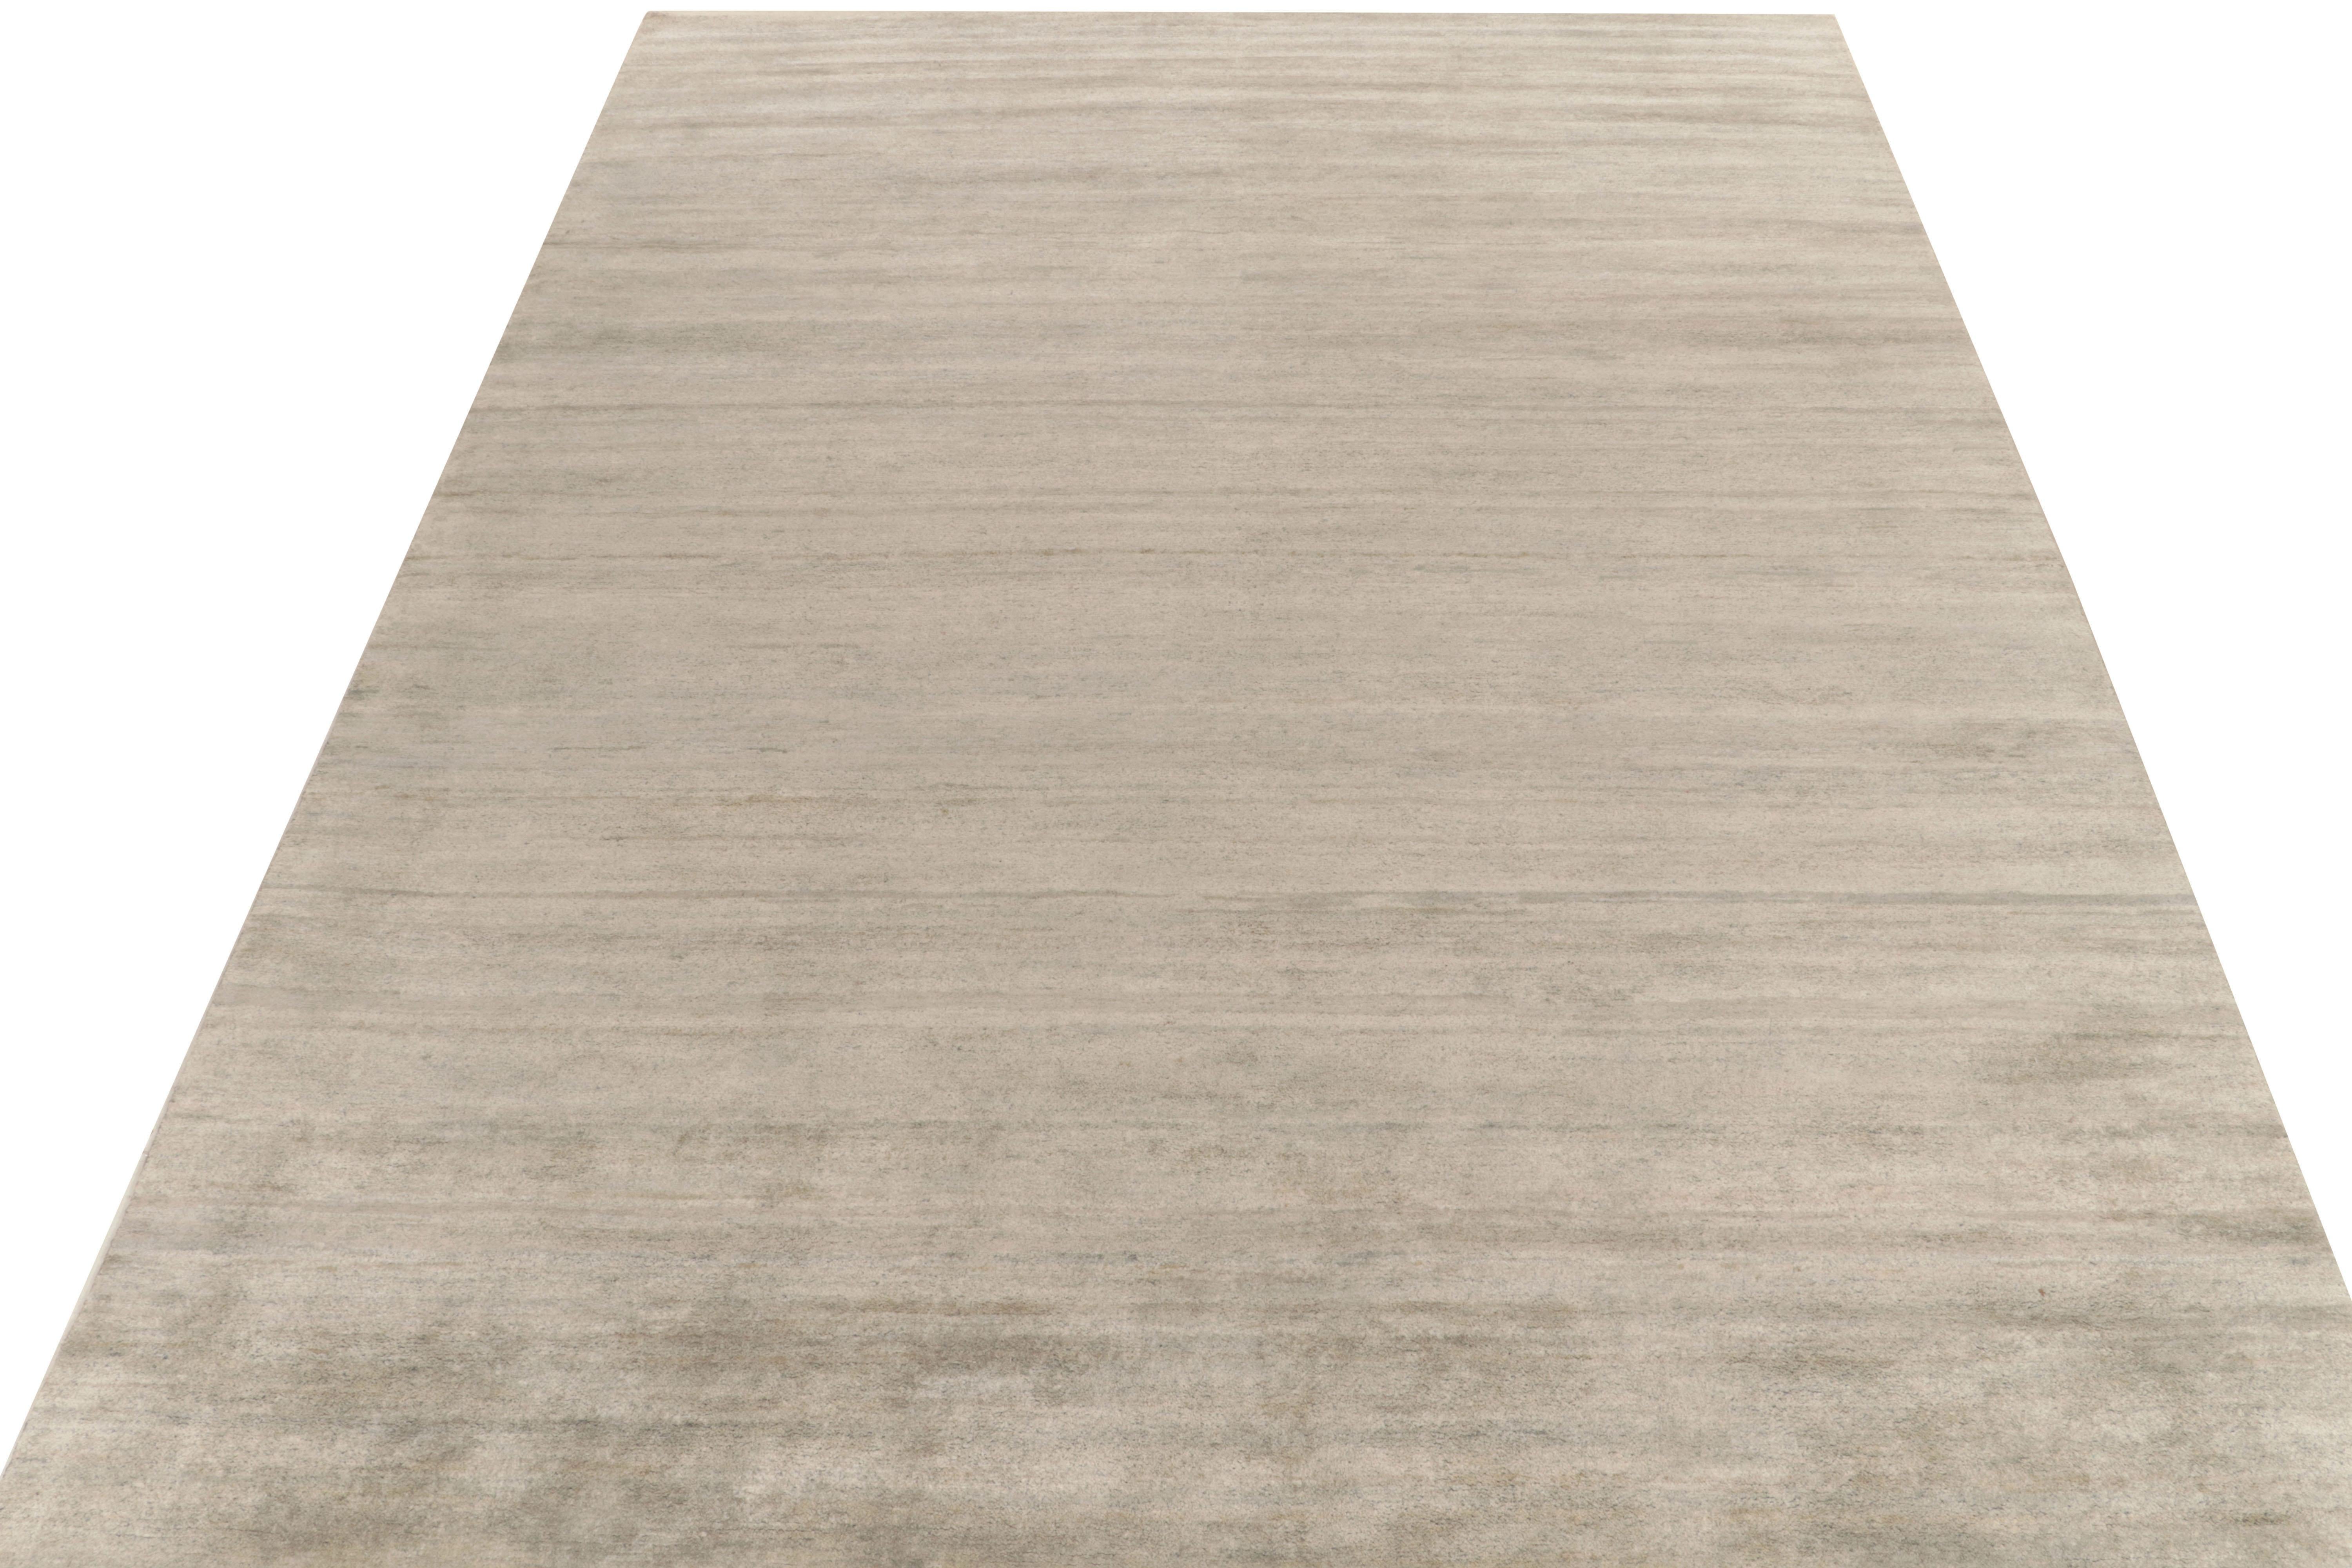 Rug & Kilim introduces its refined take on modern aesthetics with this smart, solid grey rug in 10x14 rug from our texture of color collection. The contemporary piece relishes a mature colorway of silver-grey and light blue striations—exemplifying